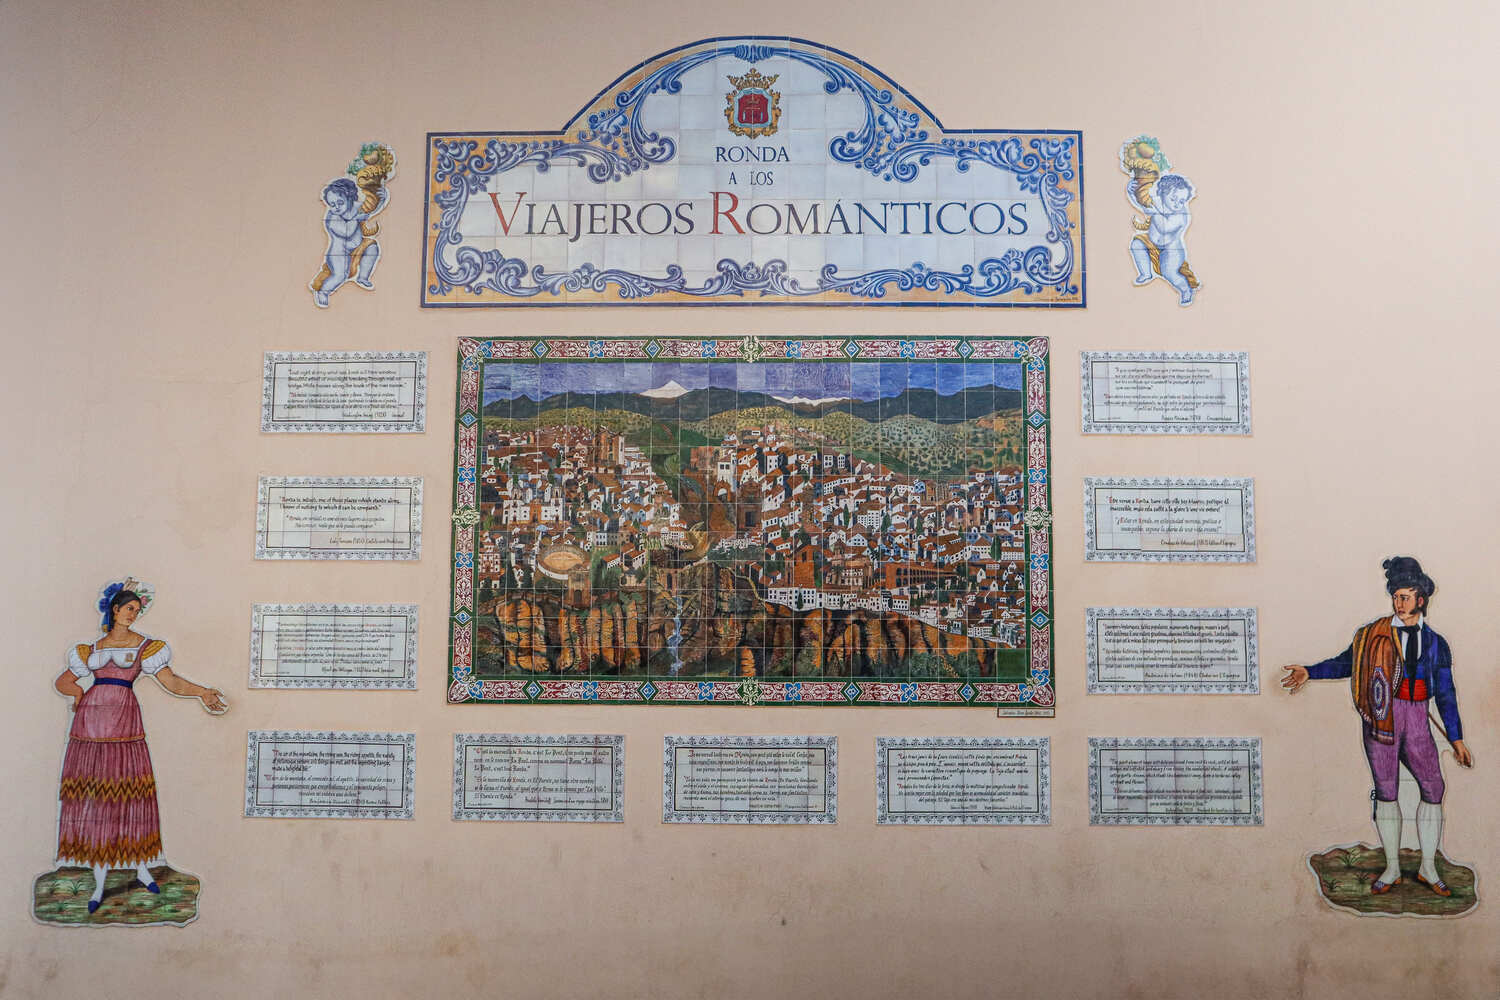 A detailed ceramic plaque depicting historical figures with the title "Viajeros Romanticos" on a wall.